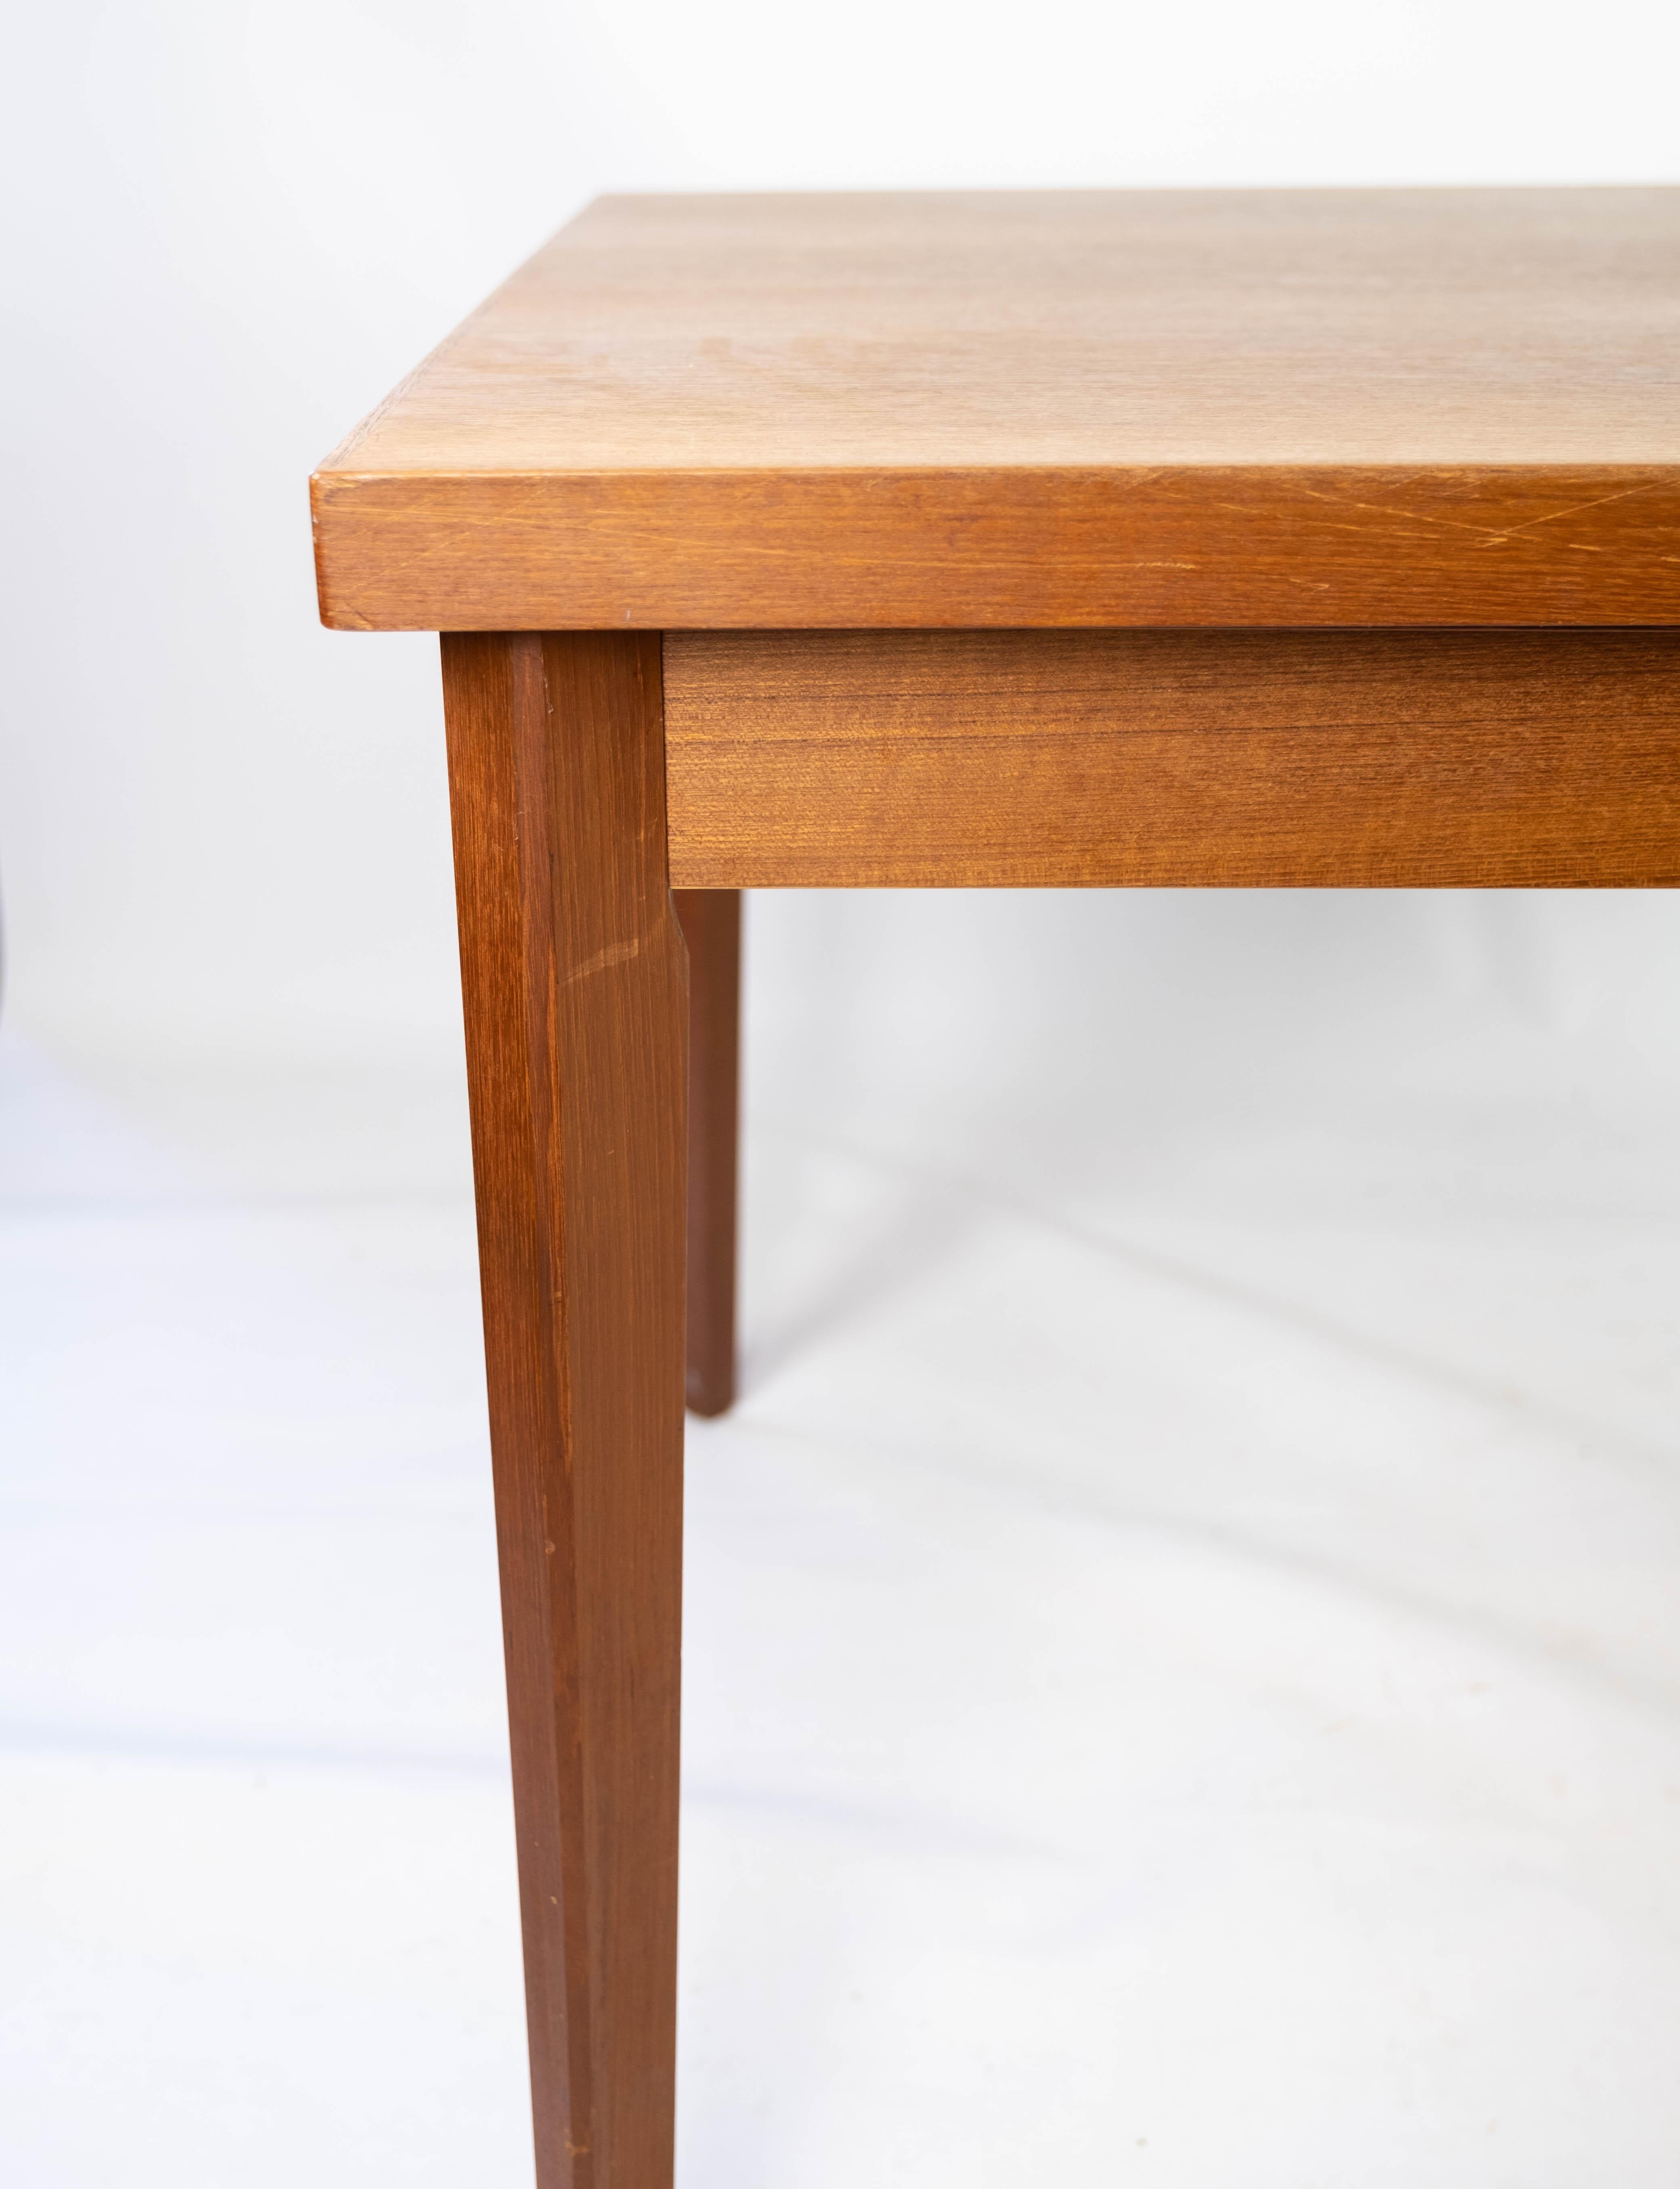 Mid-20th Century Dining Table with Extensions in Teak of Danish Design from the 1960s For Sale